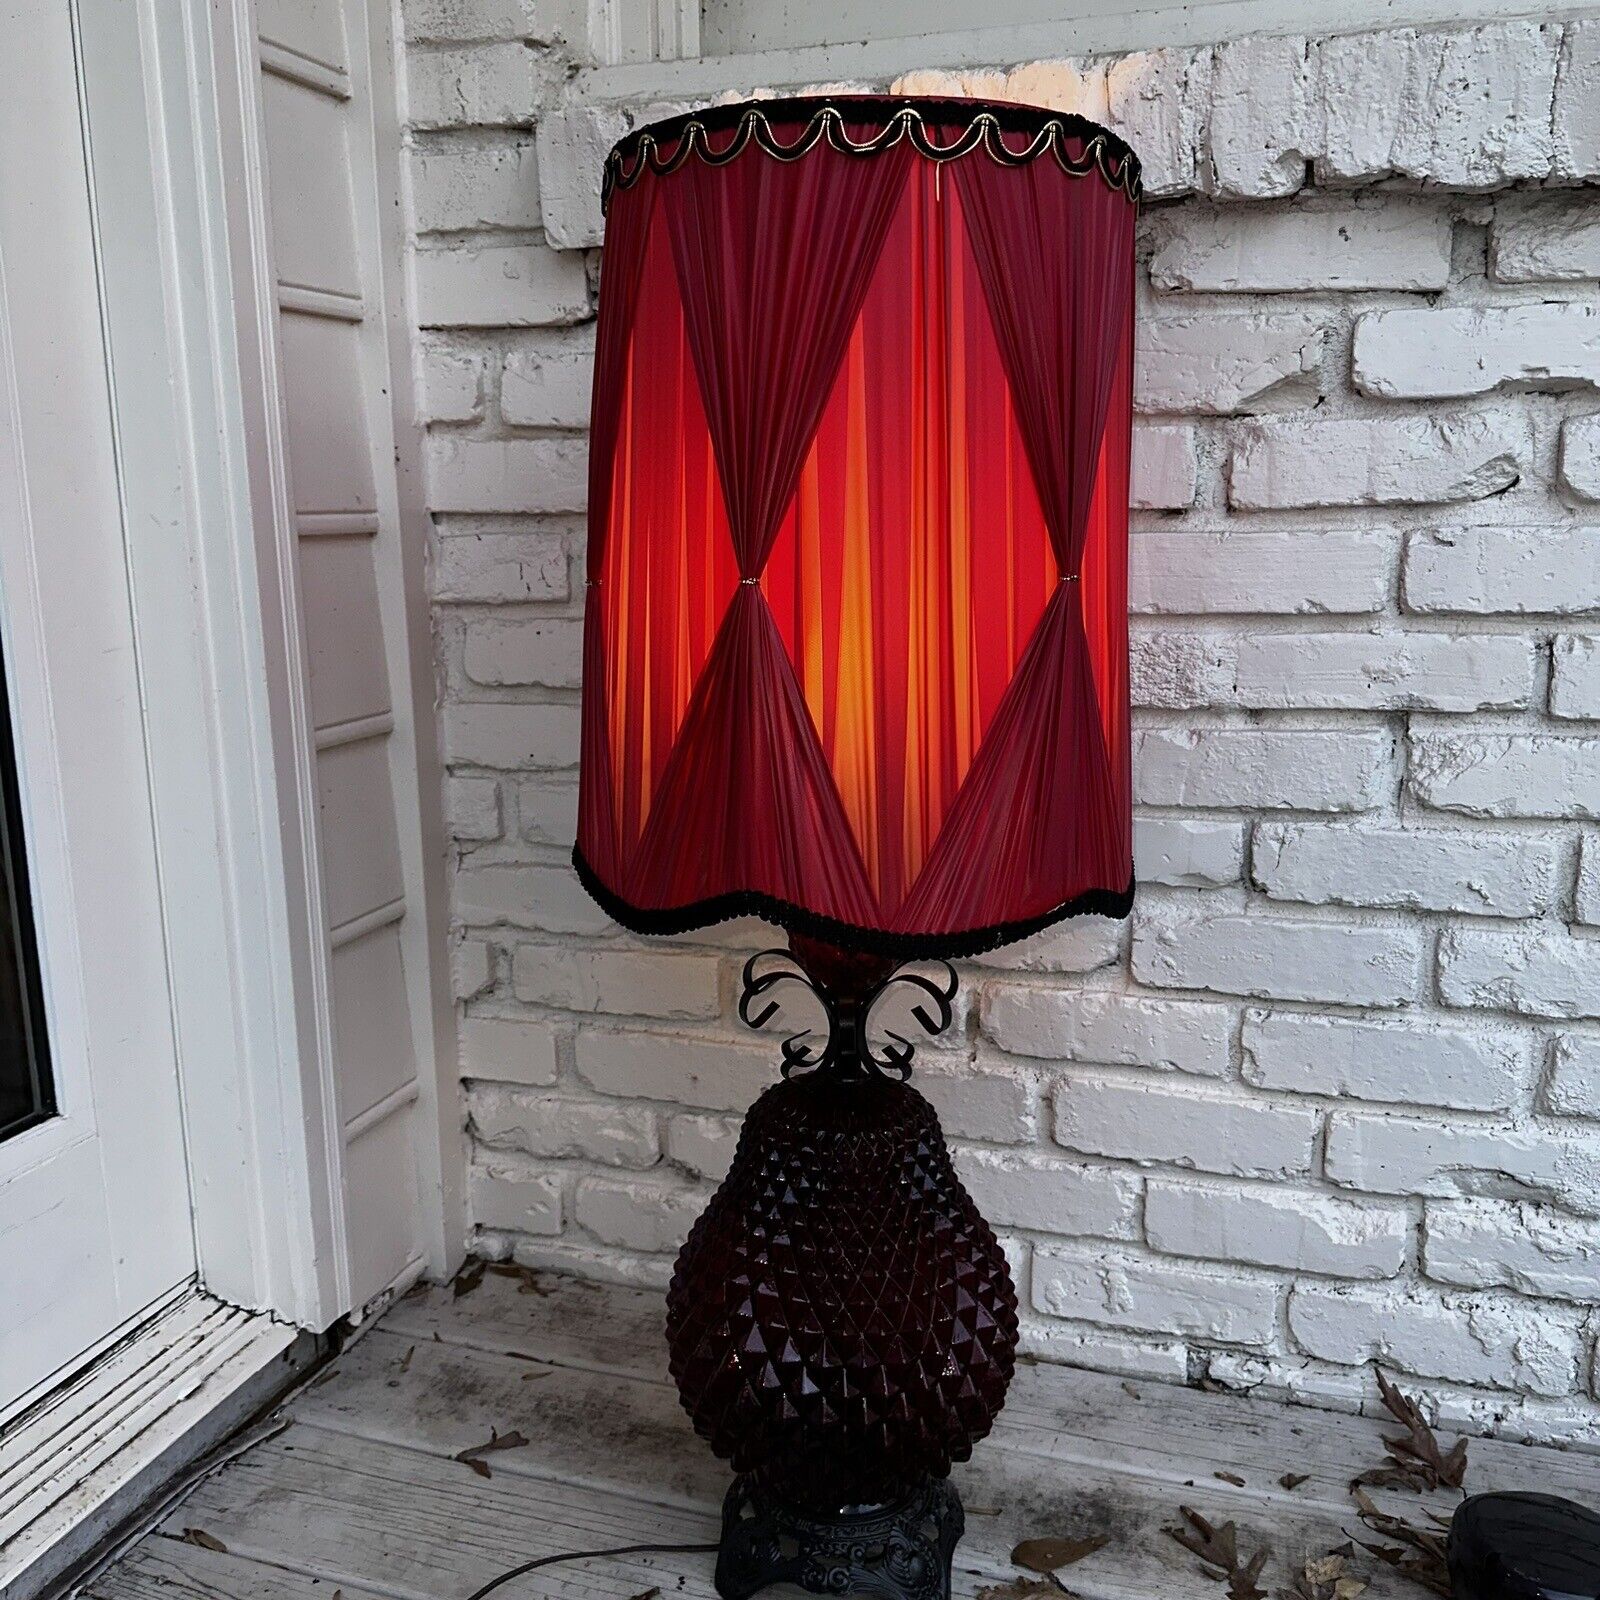 Vintage Hollywood Regency Red Pinch pleat Shade Large Parlor / Bordello lamp